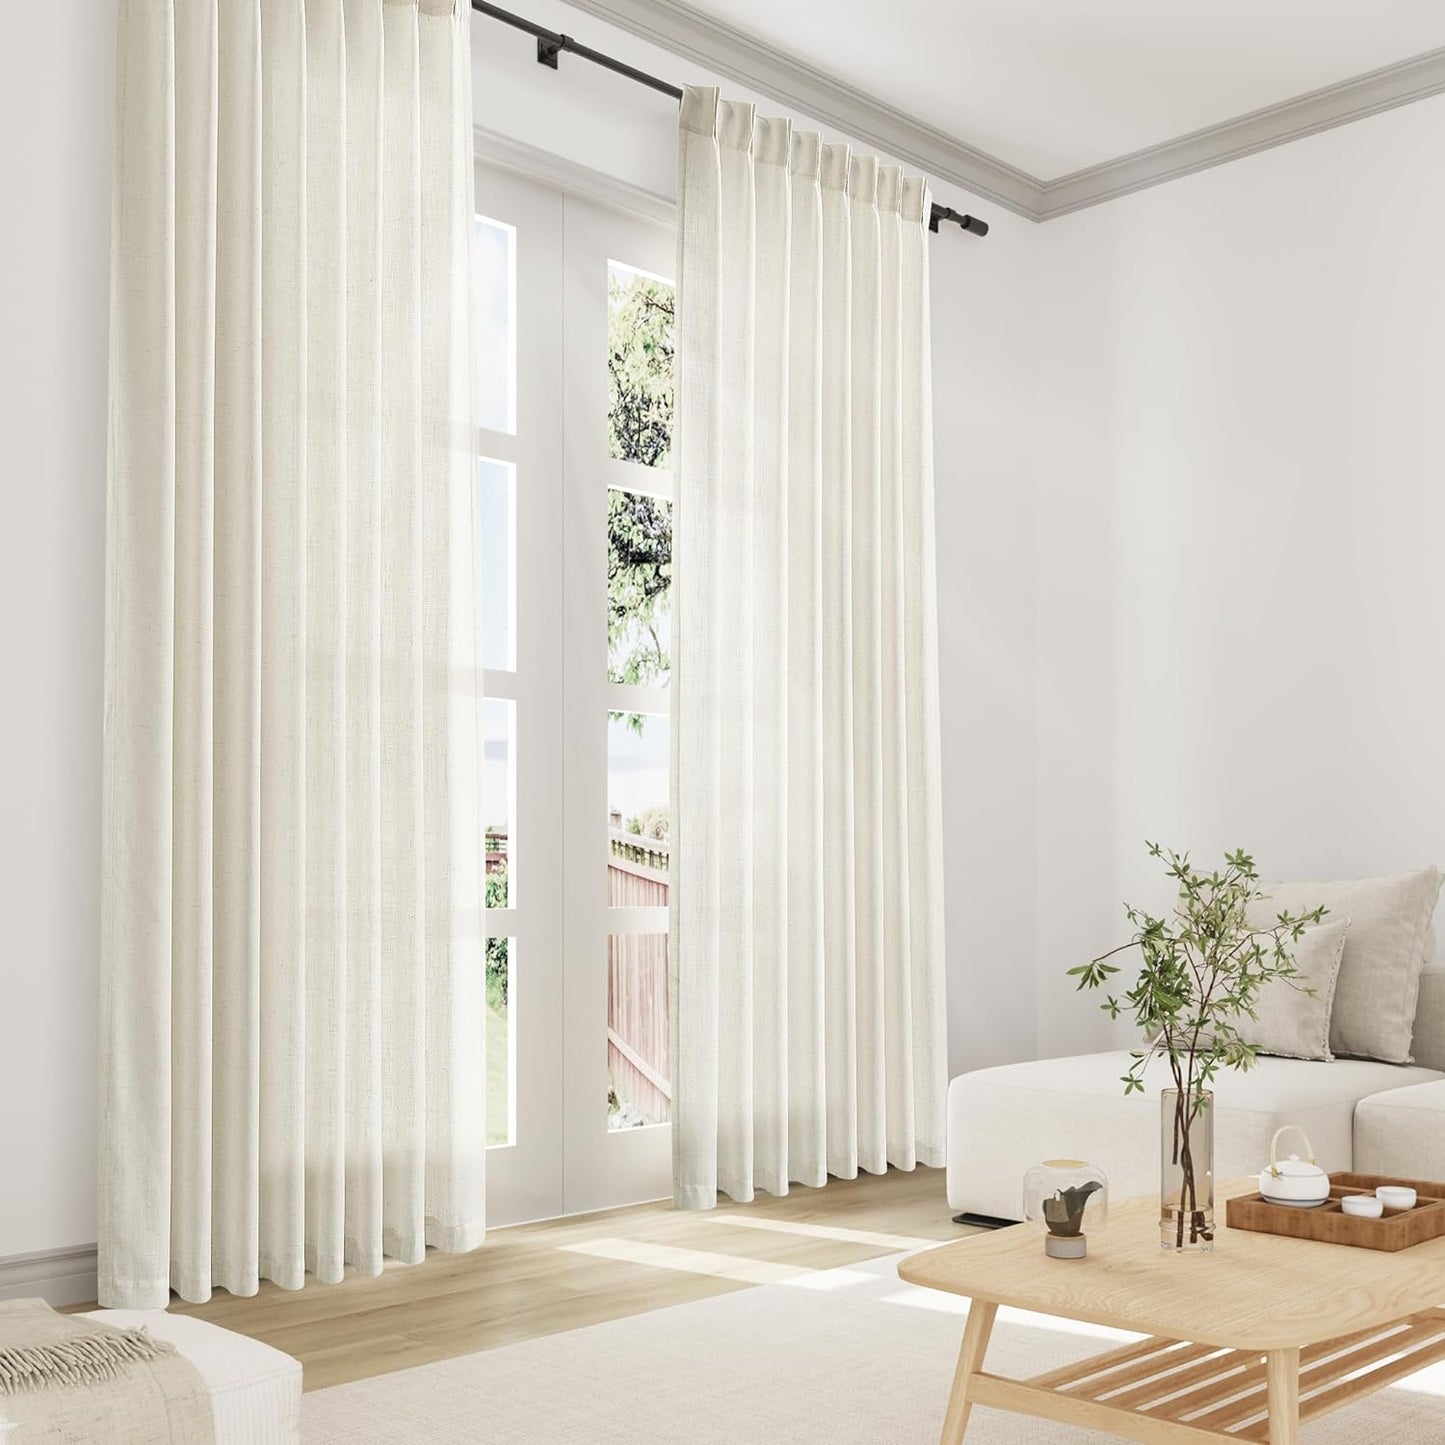 Joywell Linen Pinch Pleated Window Curtains 96 Inches Long,Back Tab Clip Rings Light Filtering Drapes with Hooks for Master Bedroom Living Room Decor,W50 X L96,Natural Beige,2 Panels Set 8 FT  Joywell   